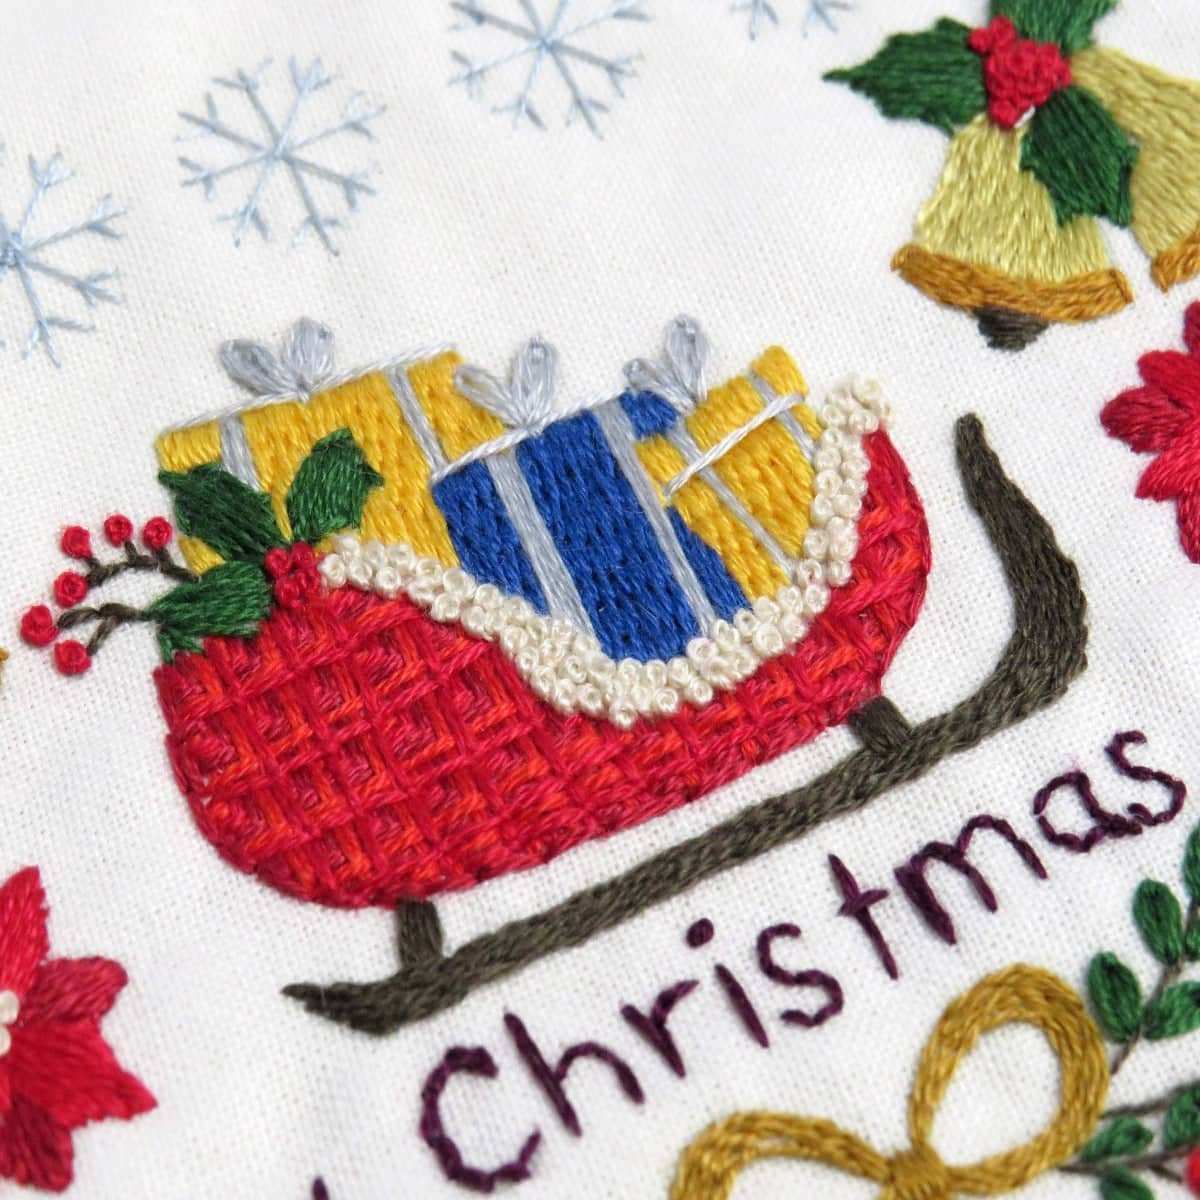 Night Before Christmas Stitch Hand Embroidery Pattern , PDF Download , StitchDoodles , christmas, embroidery hoop kit, embroidery kit for adults, embroidery kit for beginers, embroidery kits for beginners, embroidery pattern, hand embroidery, PDF pattern , StitchDoodles , shop.stitchdoodles.com